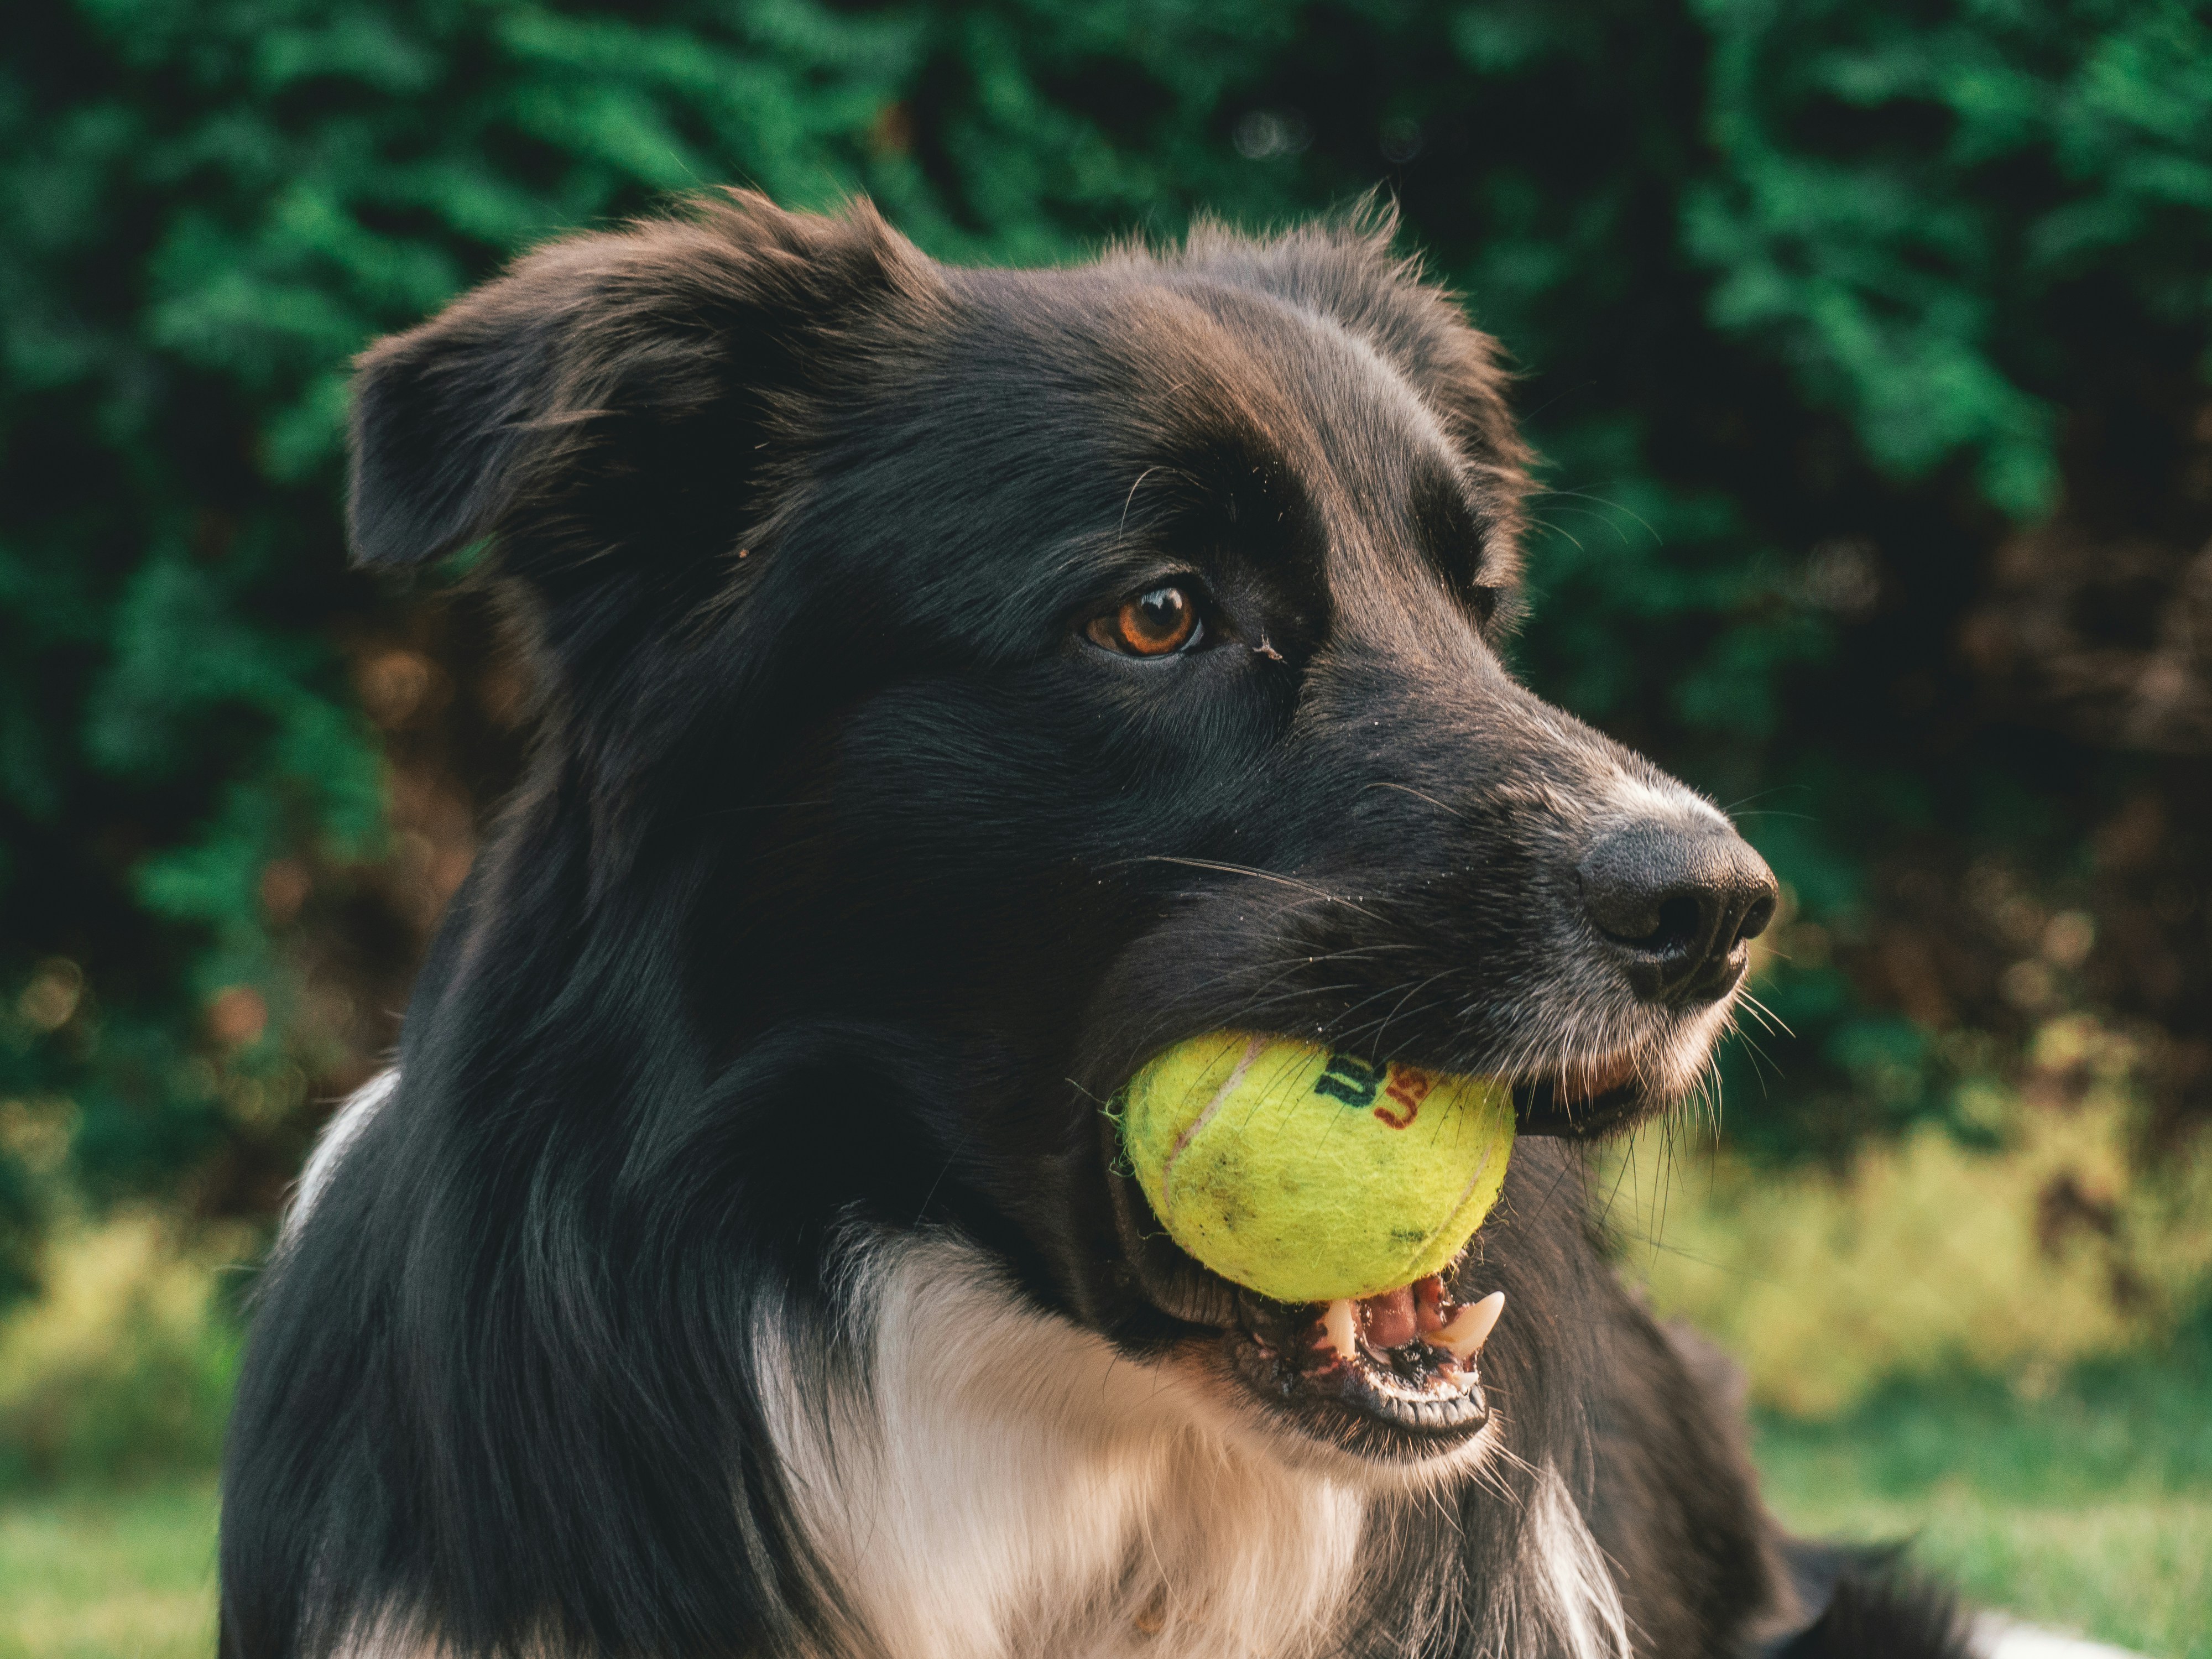 Black and white collie mix dog holding a tennis ball in mouth by green bush